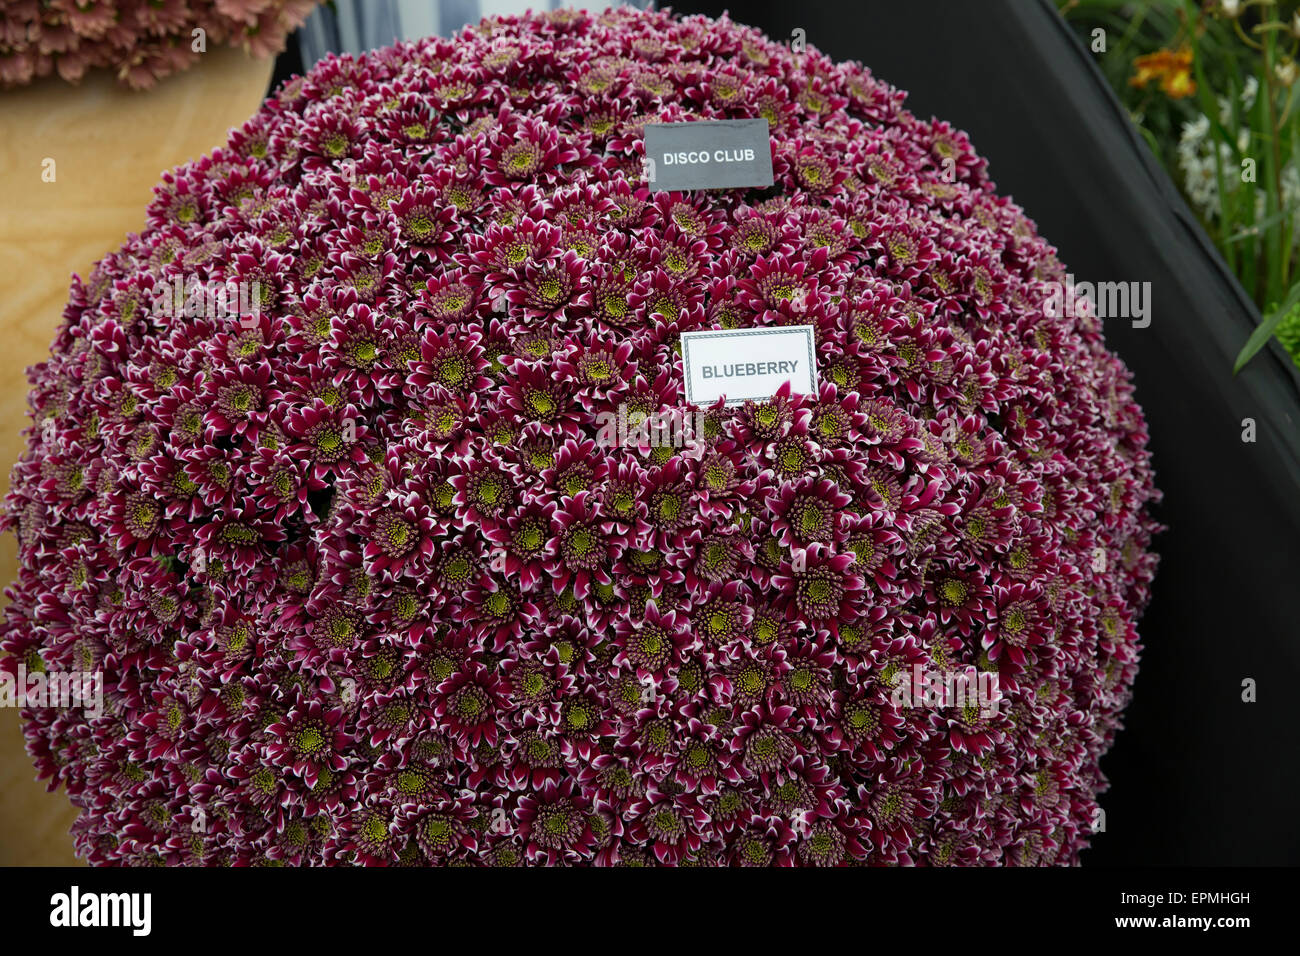 Blueberry Chrysanthemums on display at Chelsea Flower Show 2015 Stock Photo